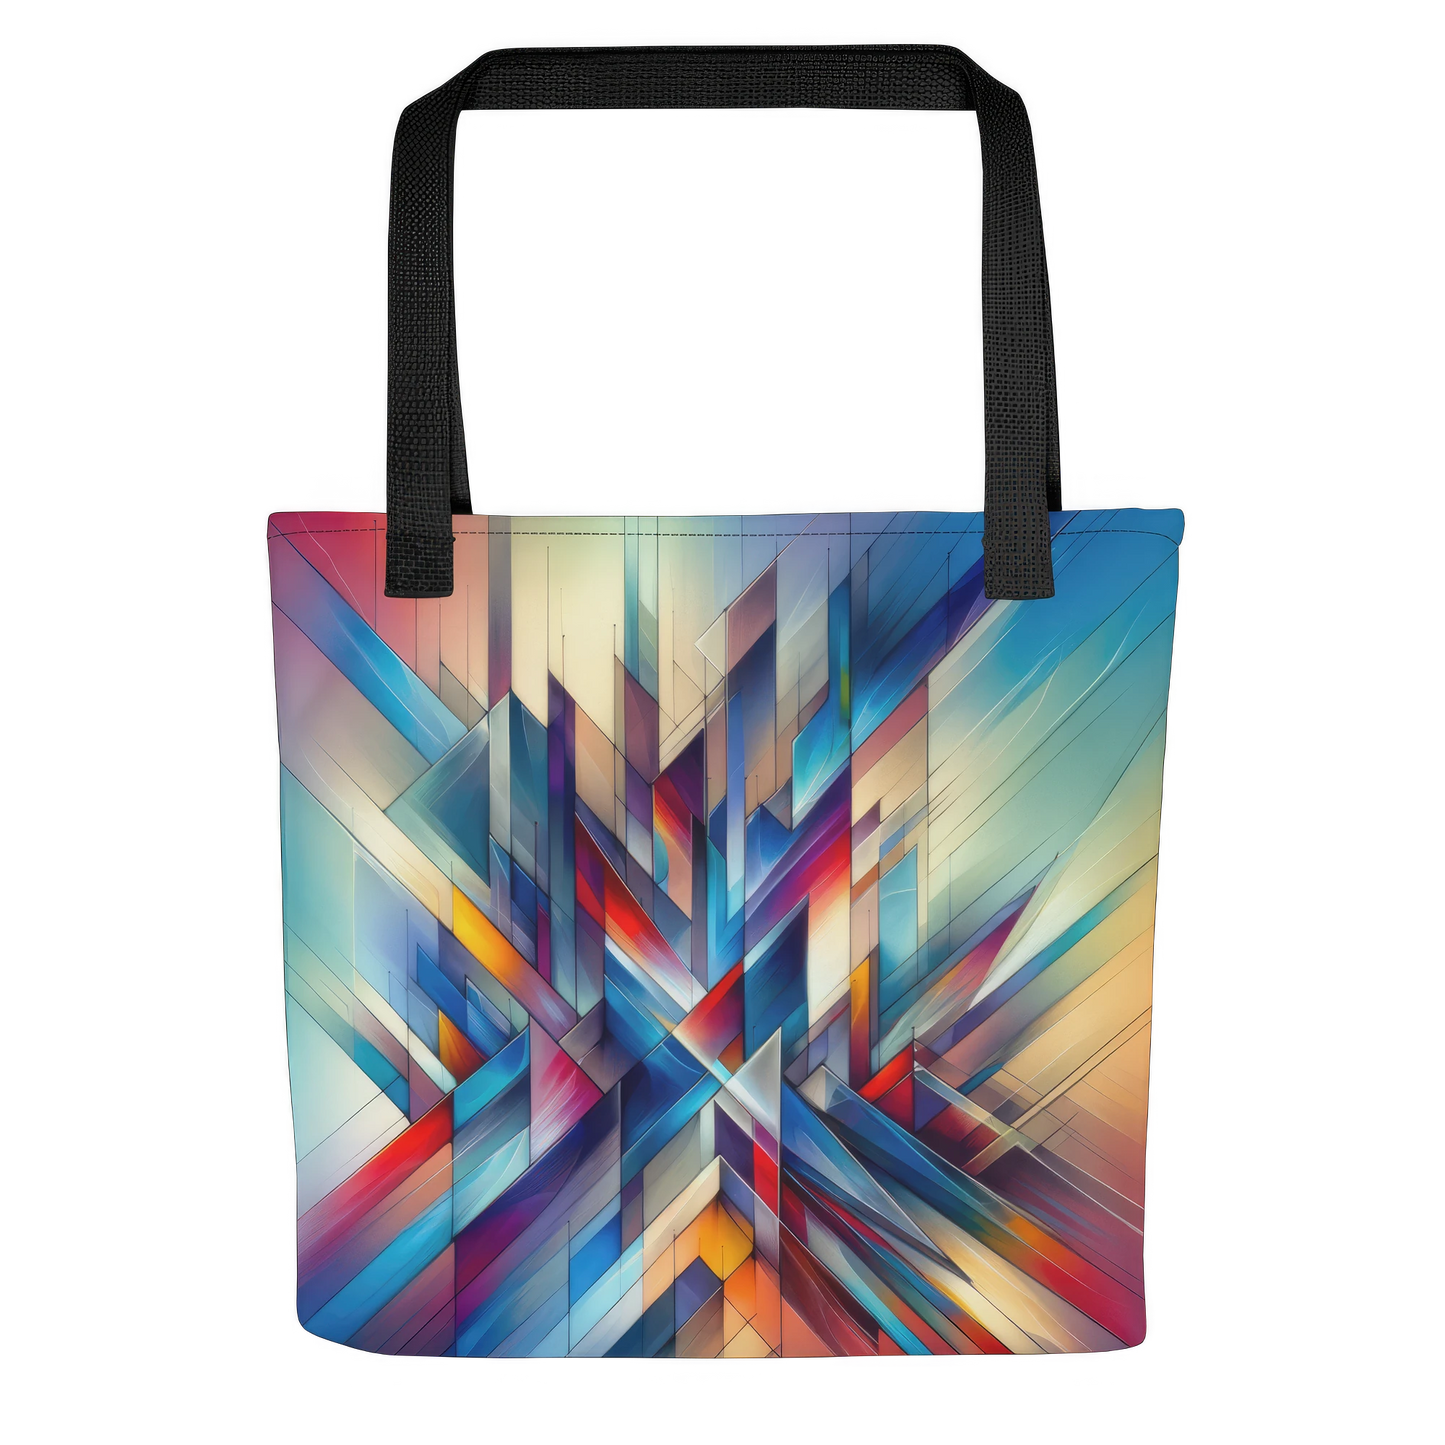 Abstract Art Tote Bag: Dynamic Synthesis Abstract